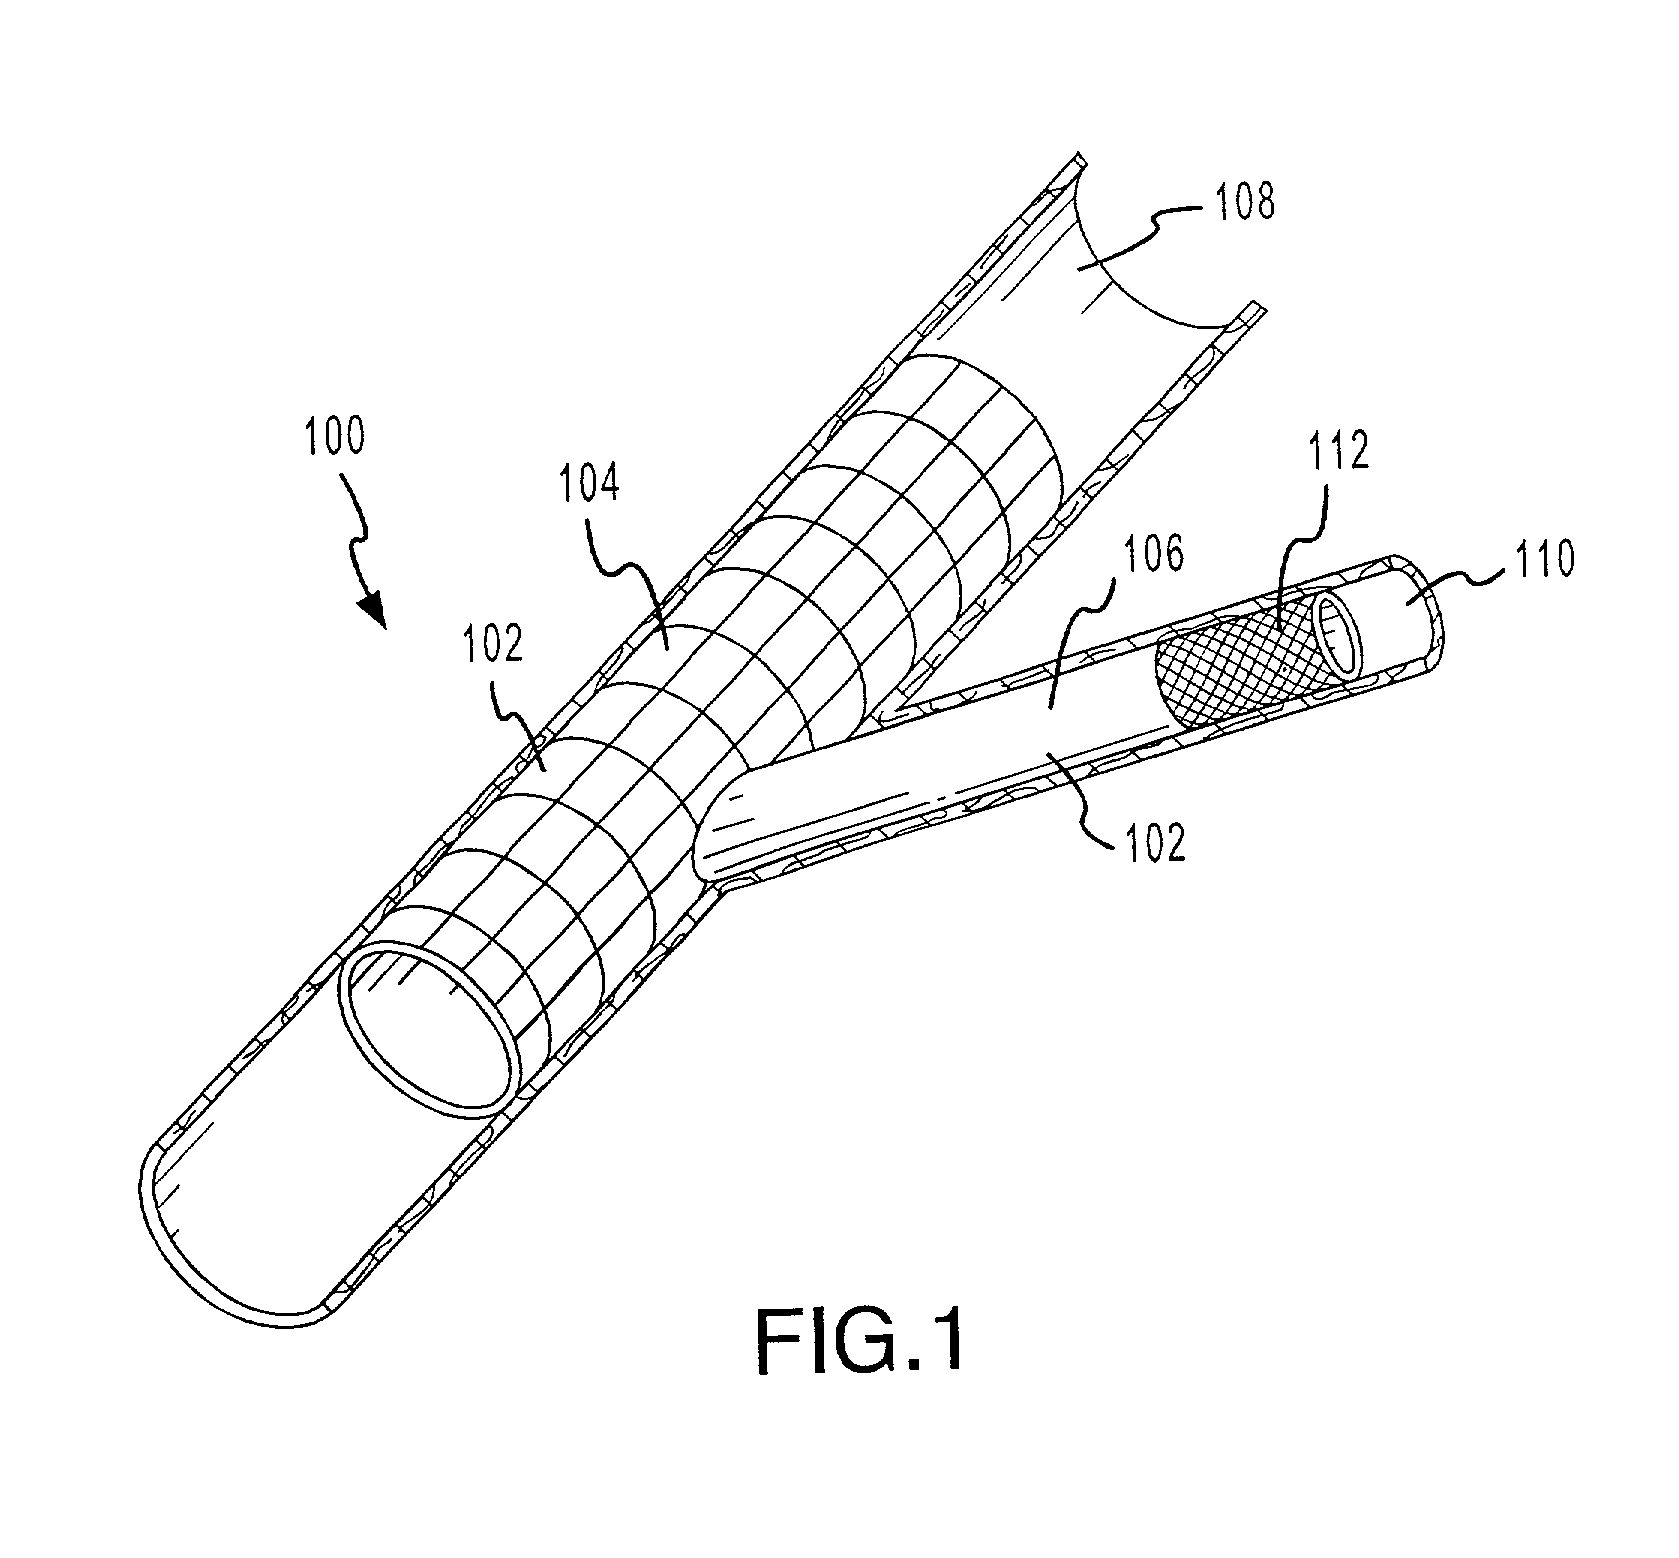 Apparatus and methods for conduits and materials